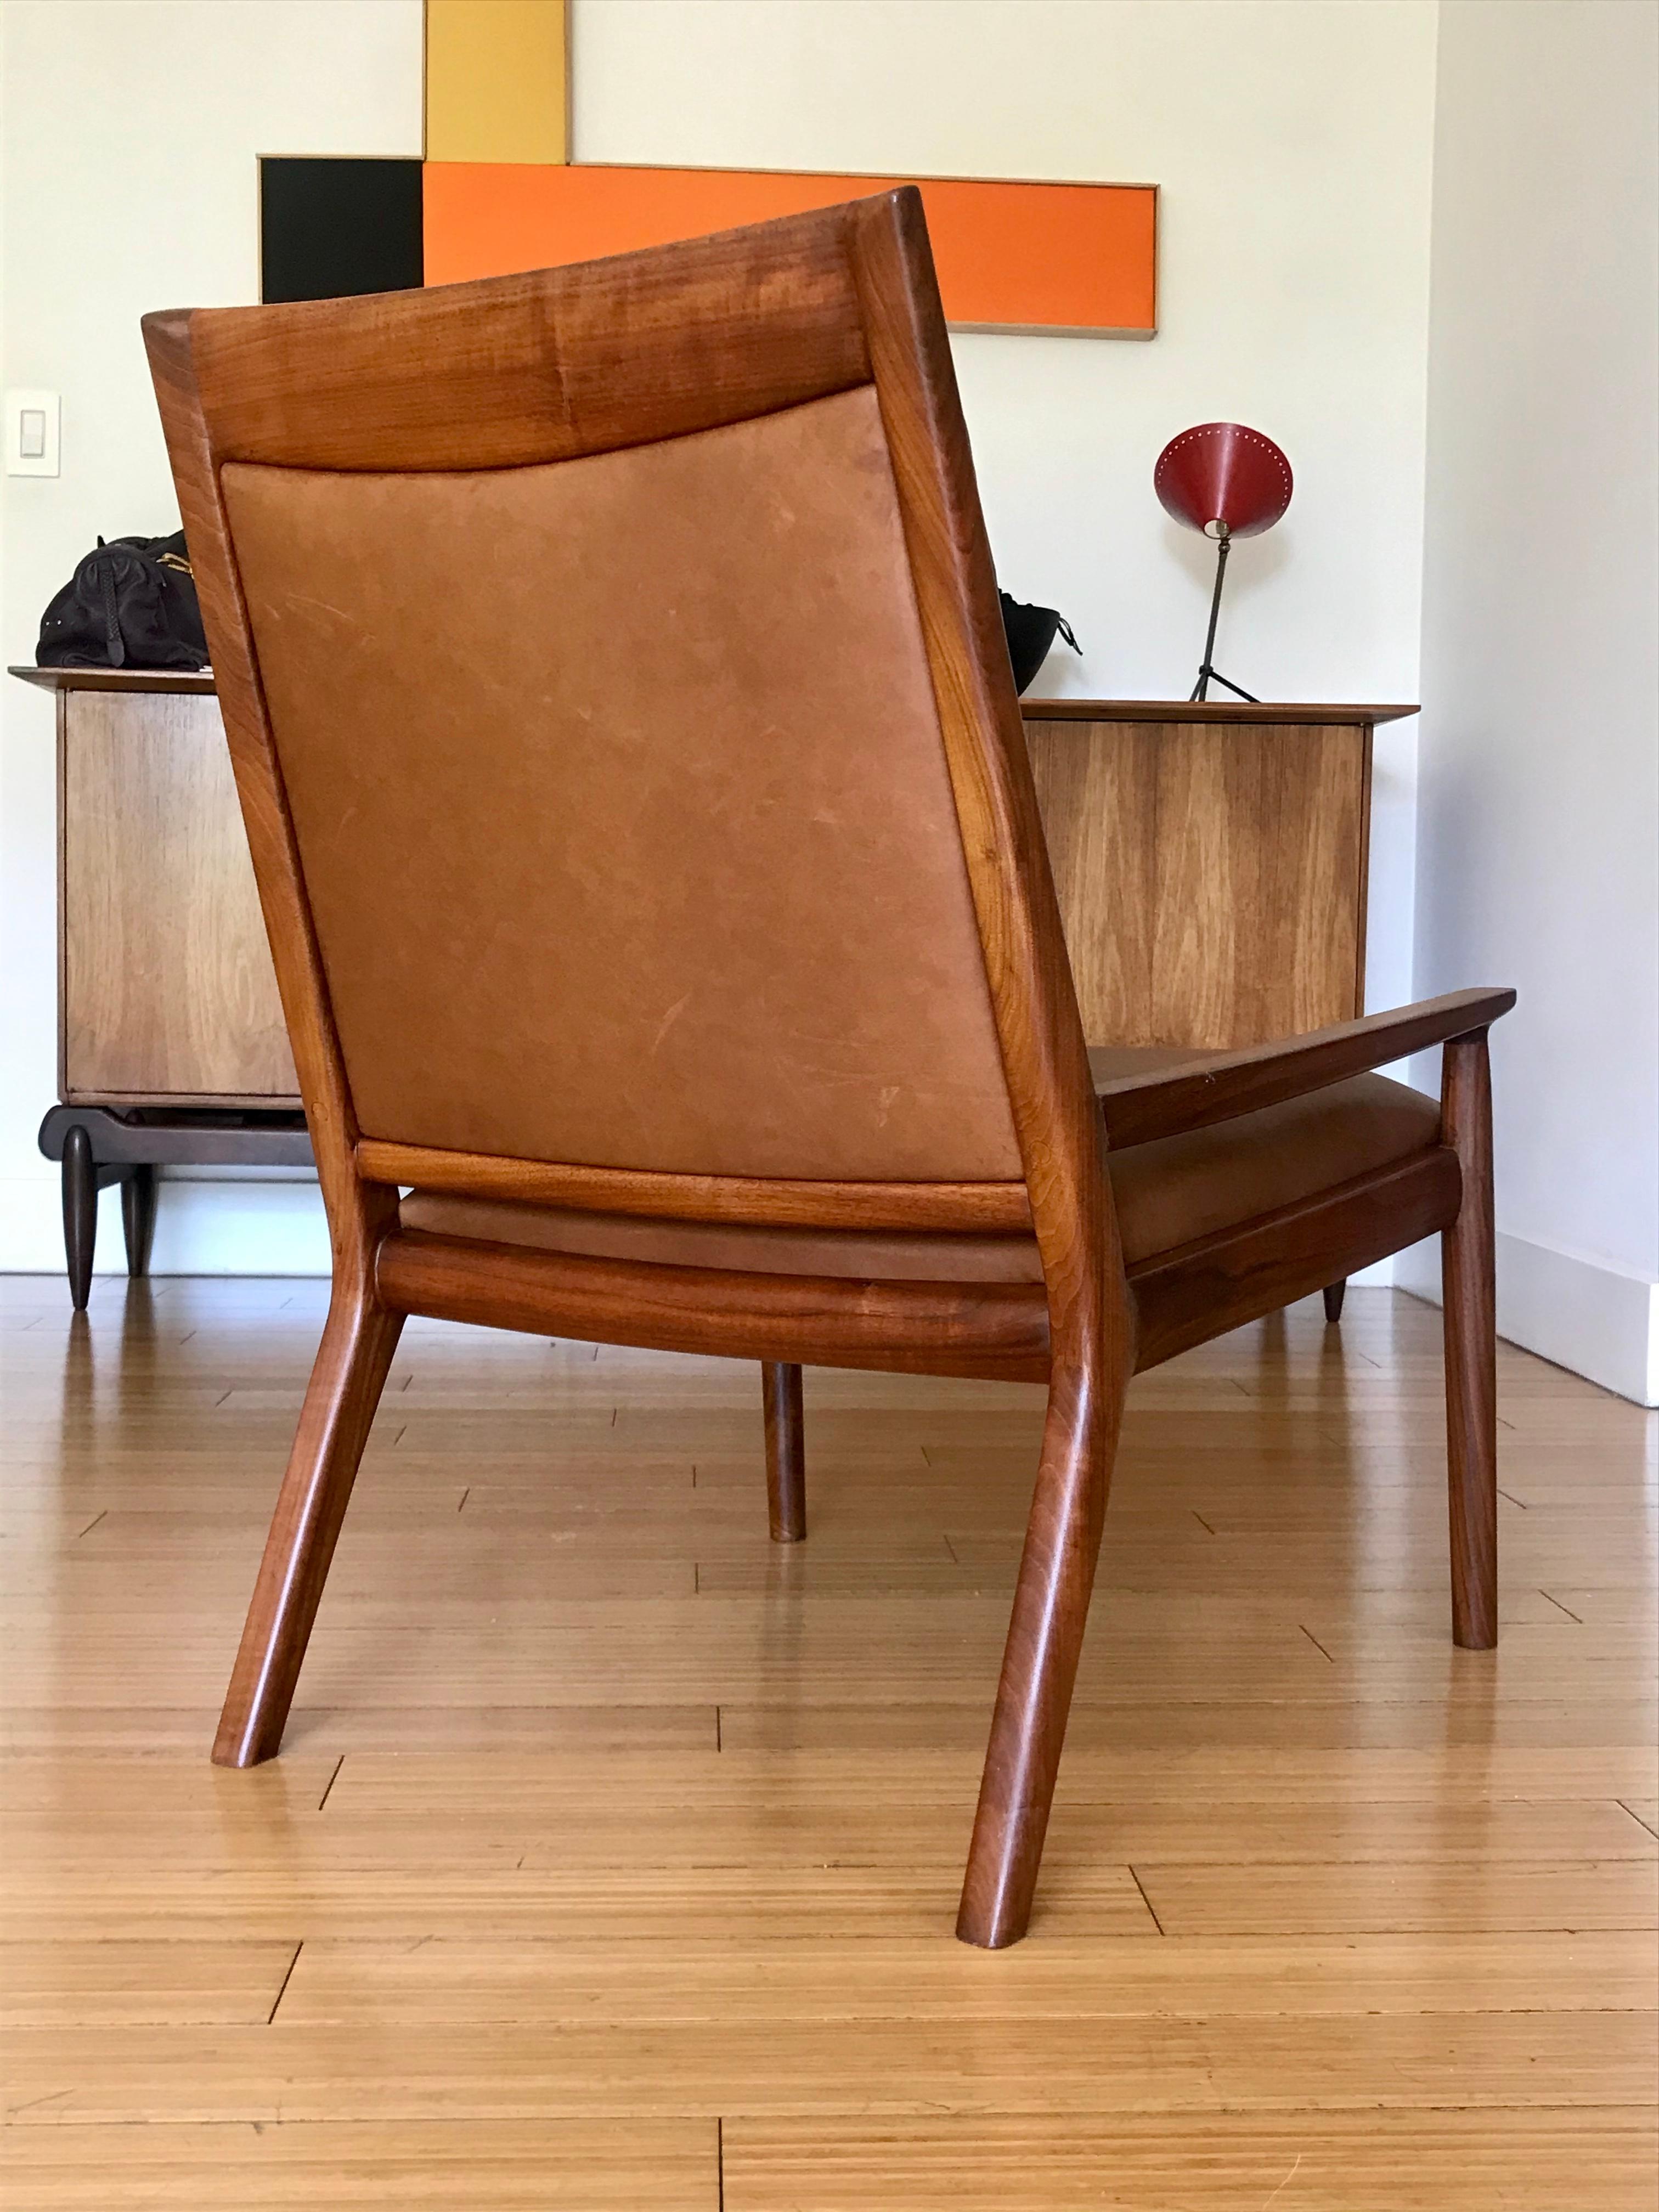 Modern Studio Craft Leather Lounge Chair After Maloof   3